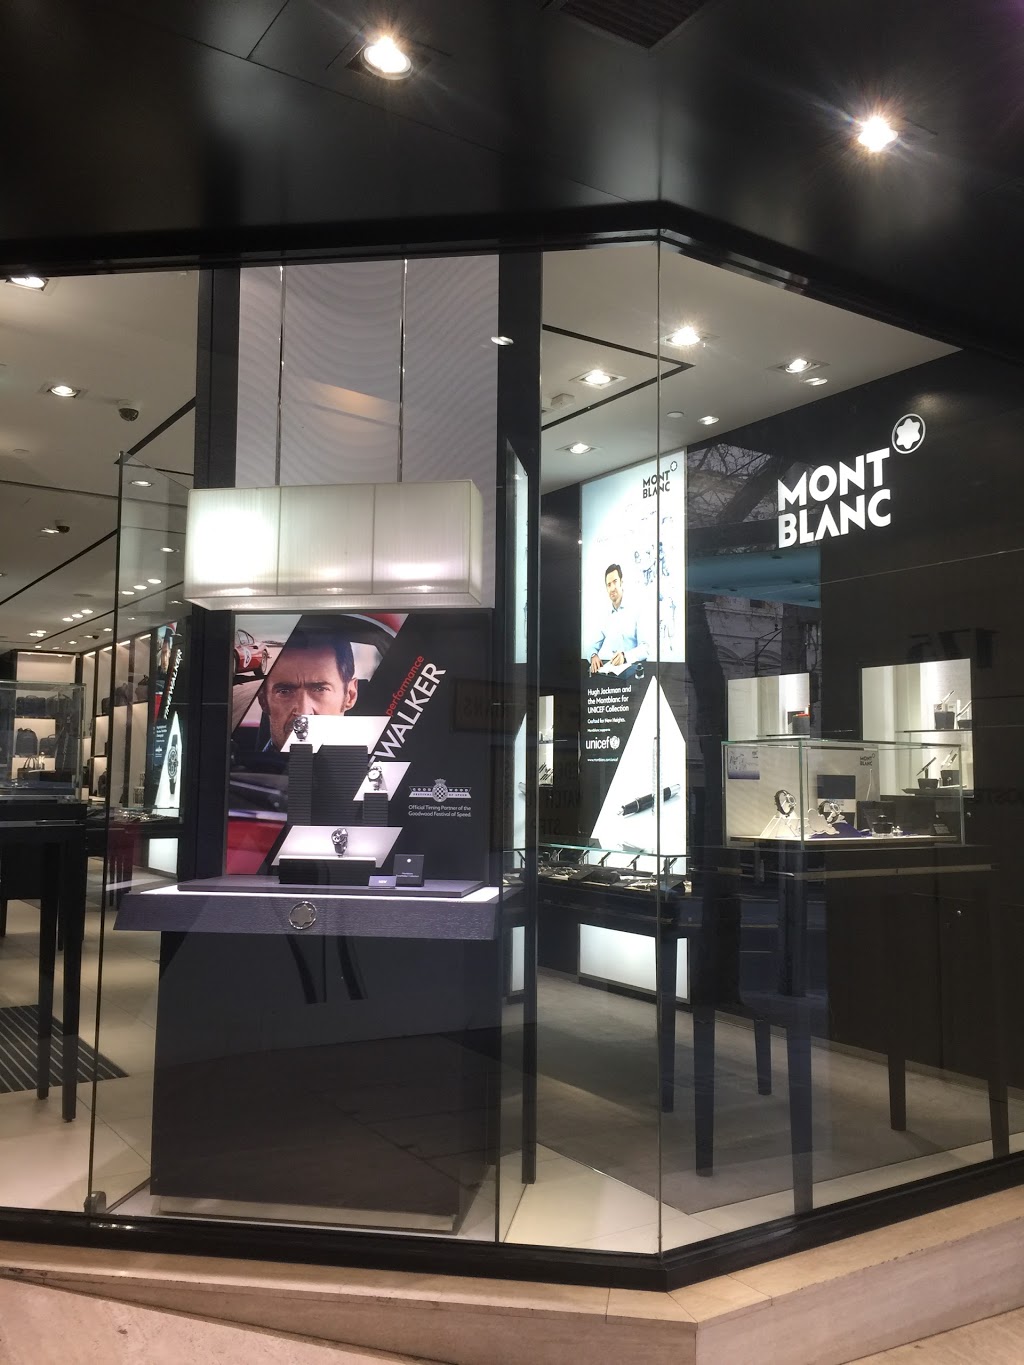 Montblanc | jewelry store | 175 Collins St, Melbourne VIC 3000, Australia | 0396635077 OR +61 3 9663 5077